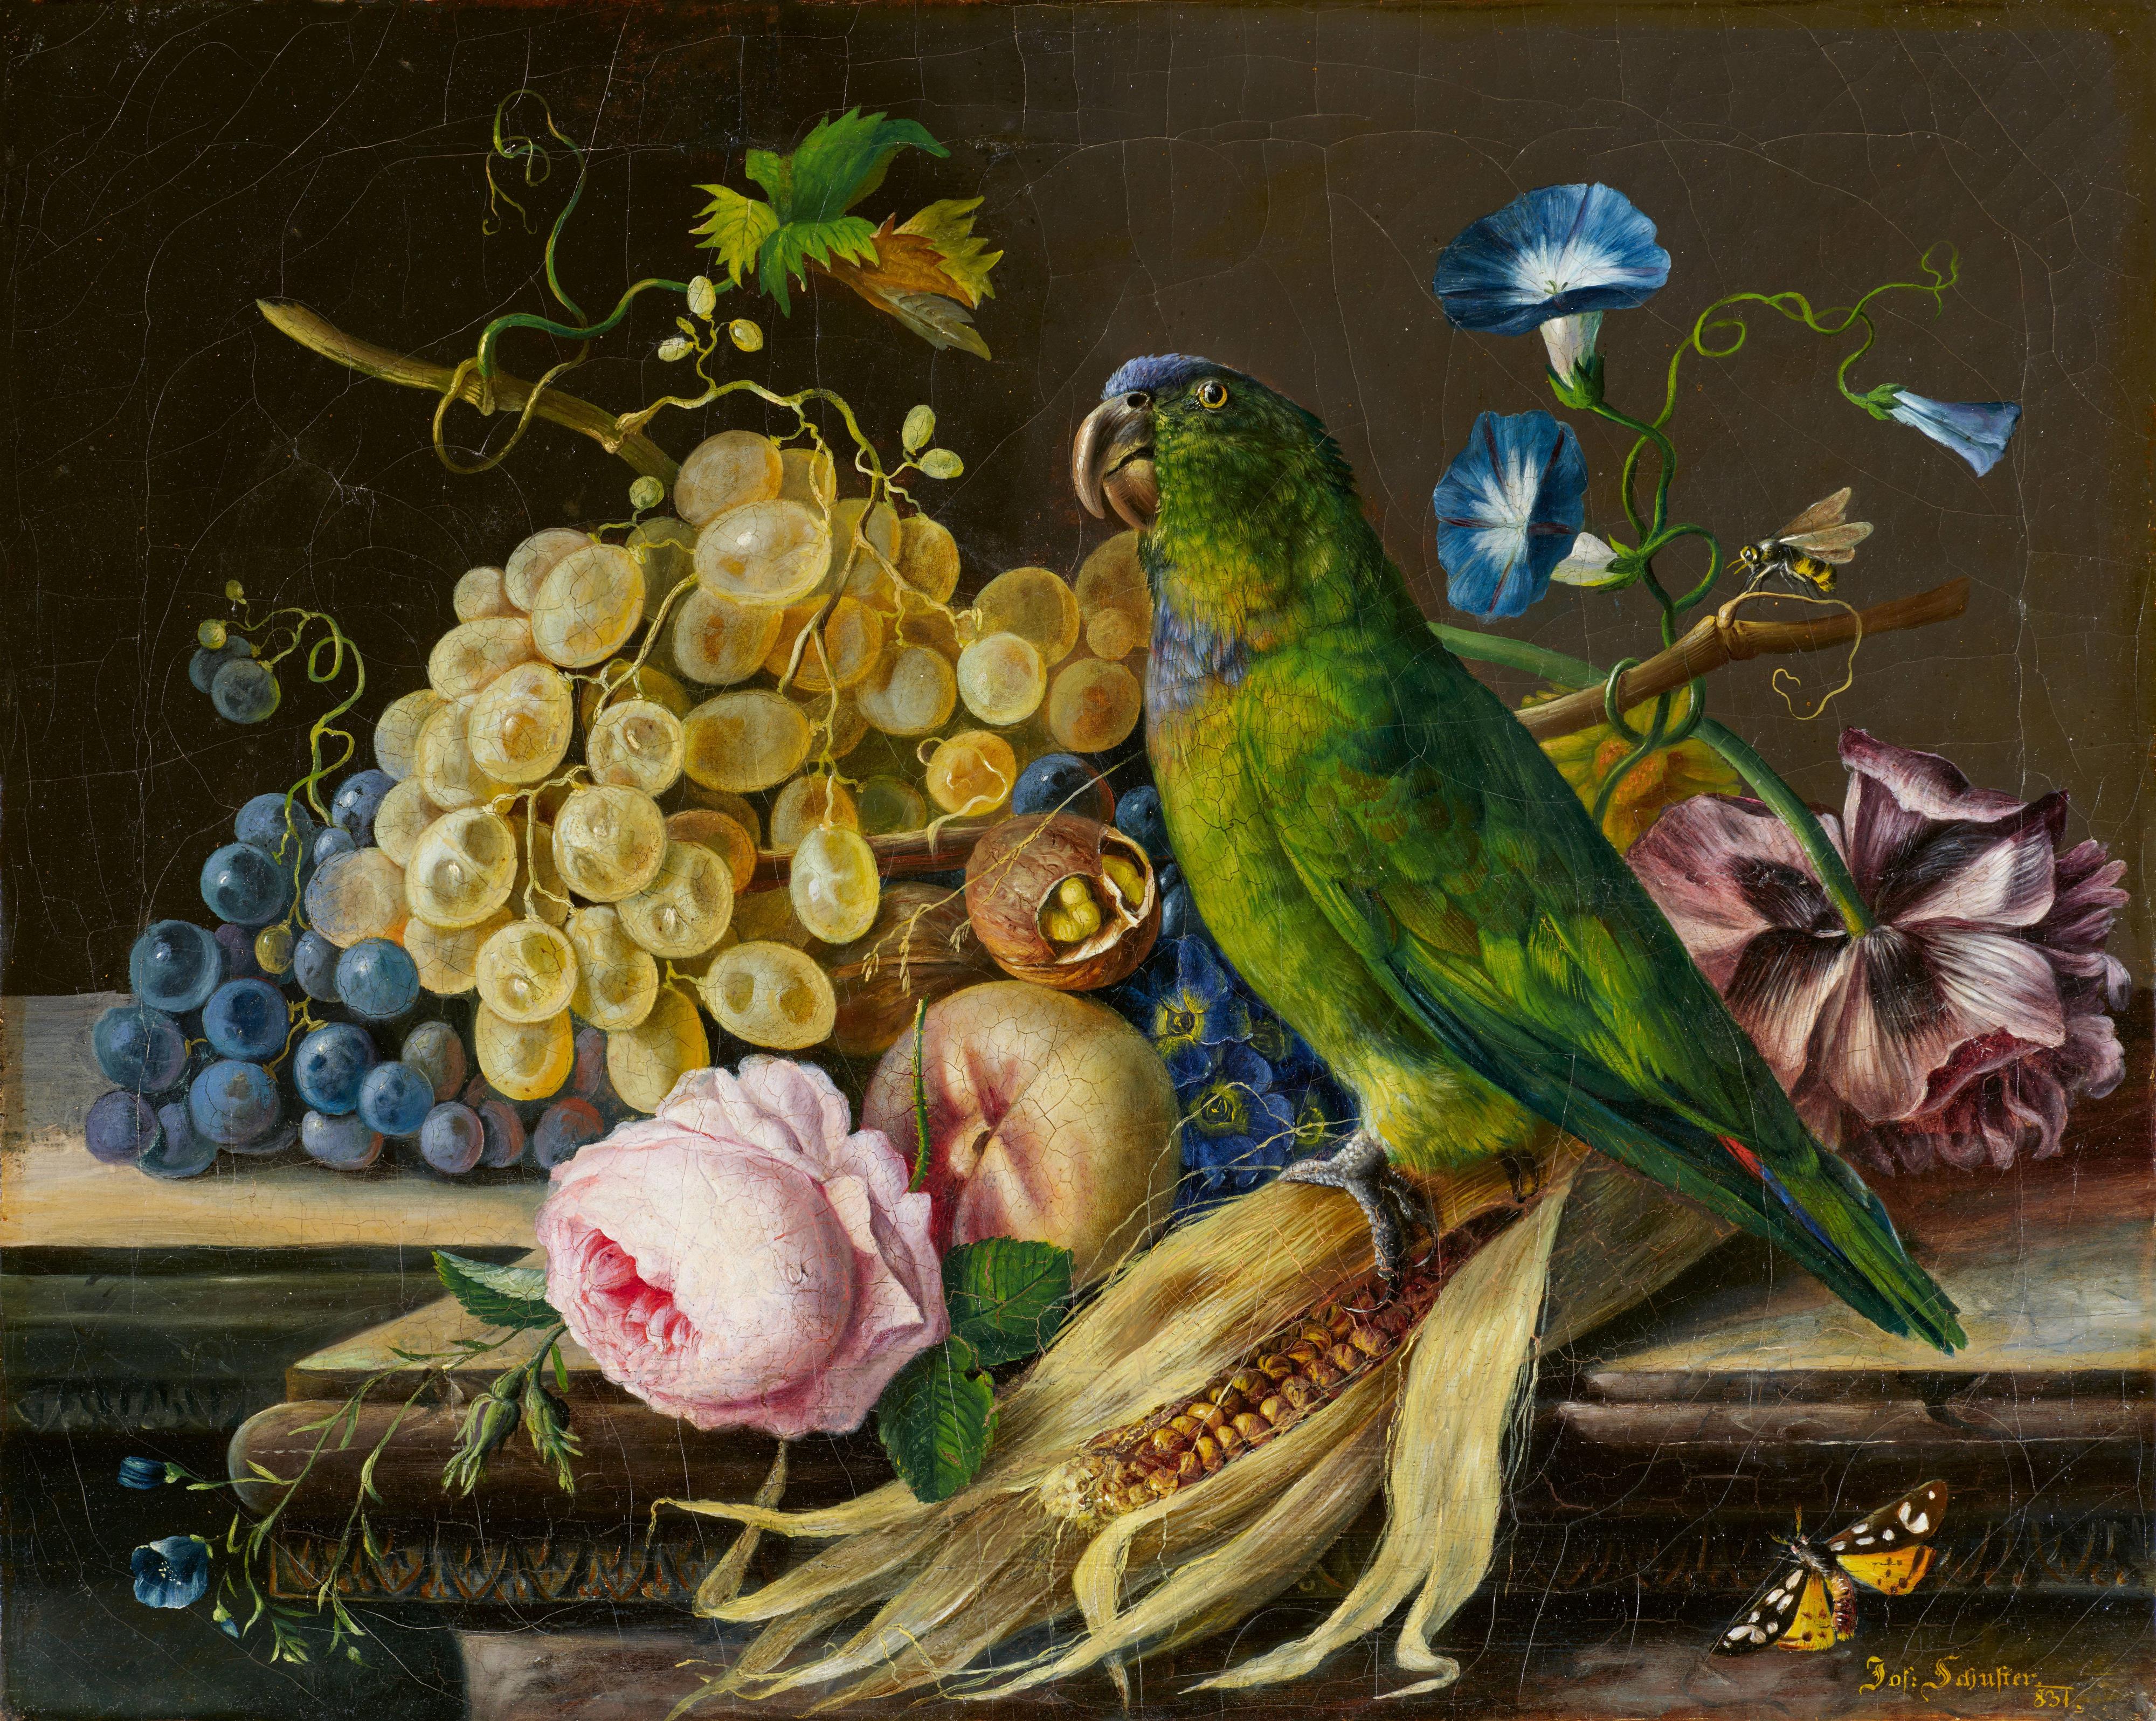 Josef Schuster - Still Life with a Parrot - image-1